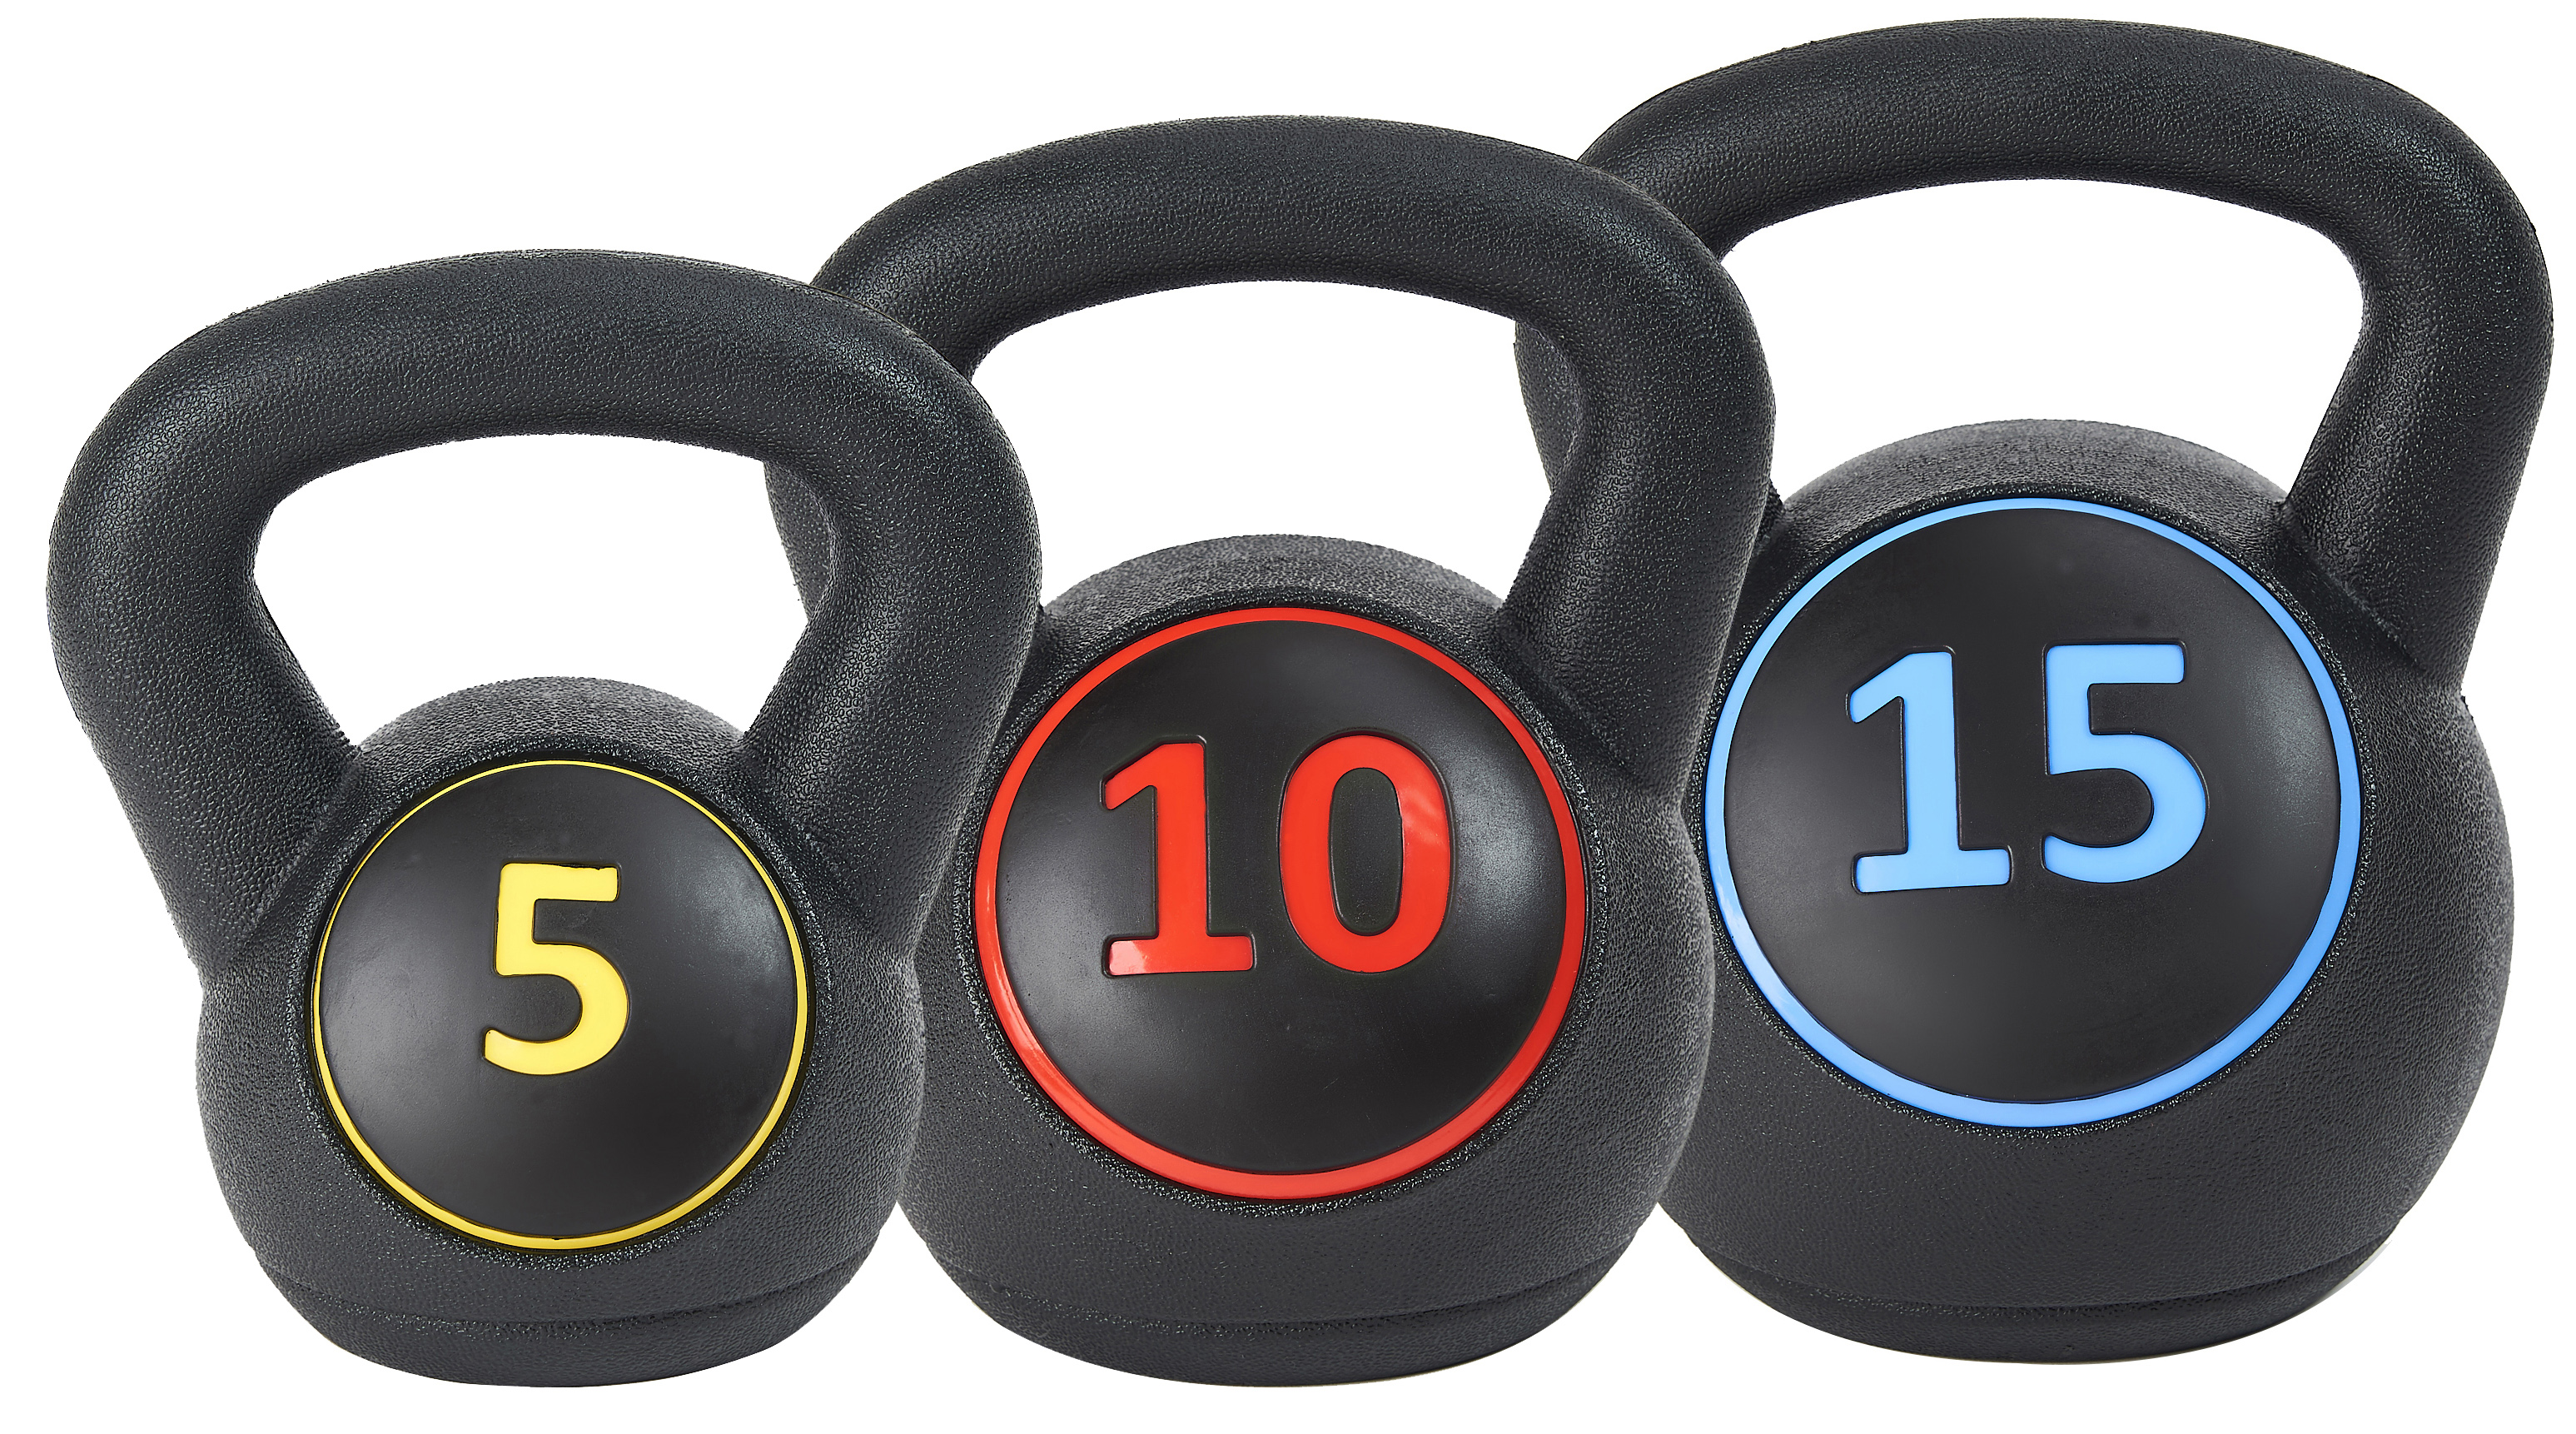 BalanceFrom Wide Grip 3-Piece Kettlebell Exercise Fitness Weight Set, Include 5 lbs, 10 lbs, 15 lbs - image 2 of 6